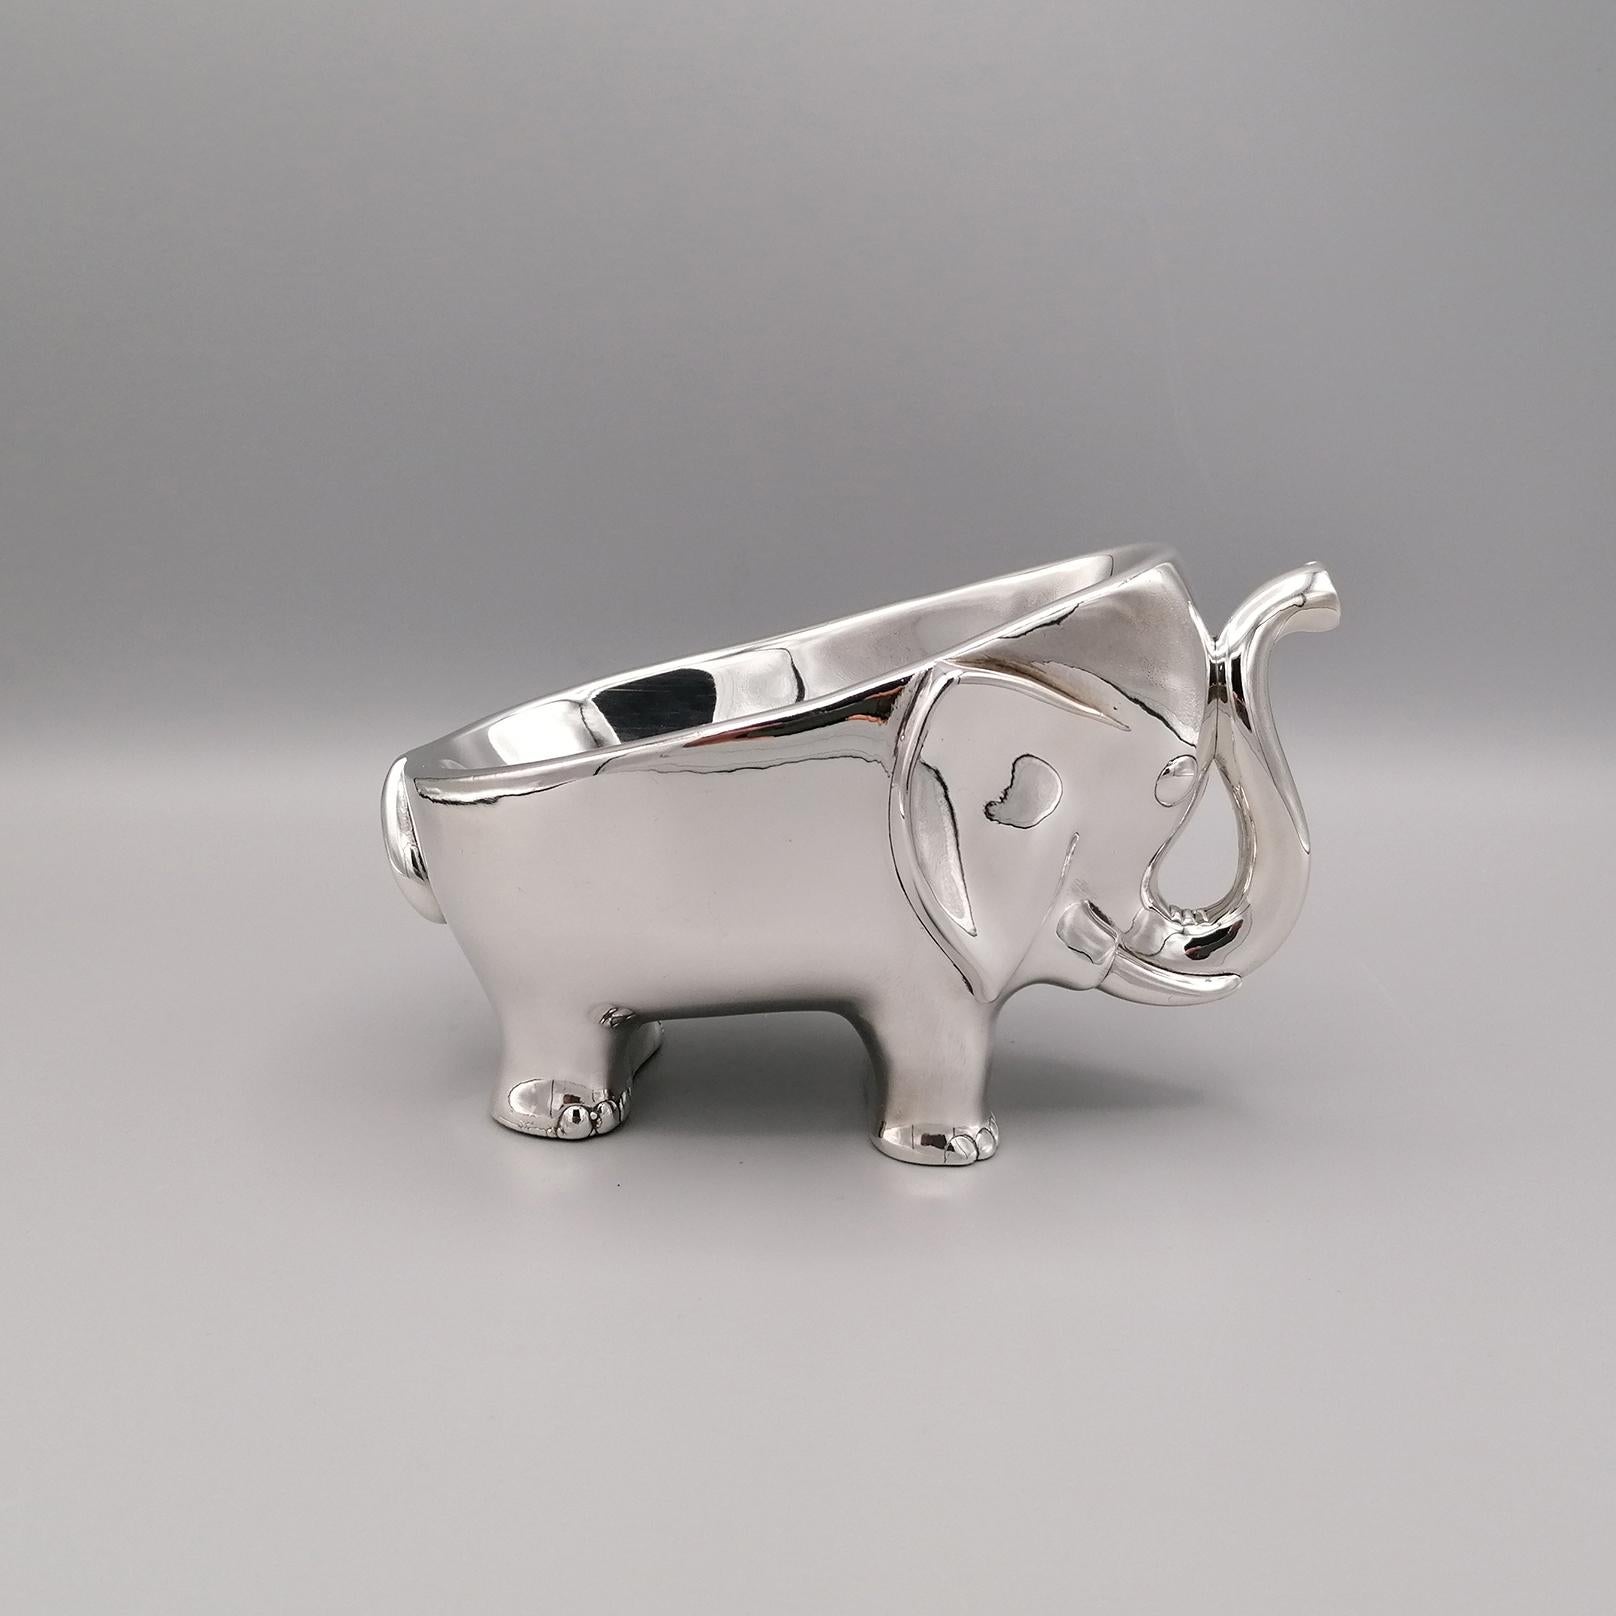 20th Century Sterling Silver Stylized Elephant Shaped Soap / Candy Holder 6